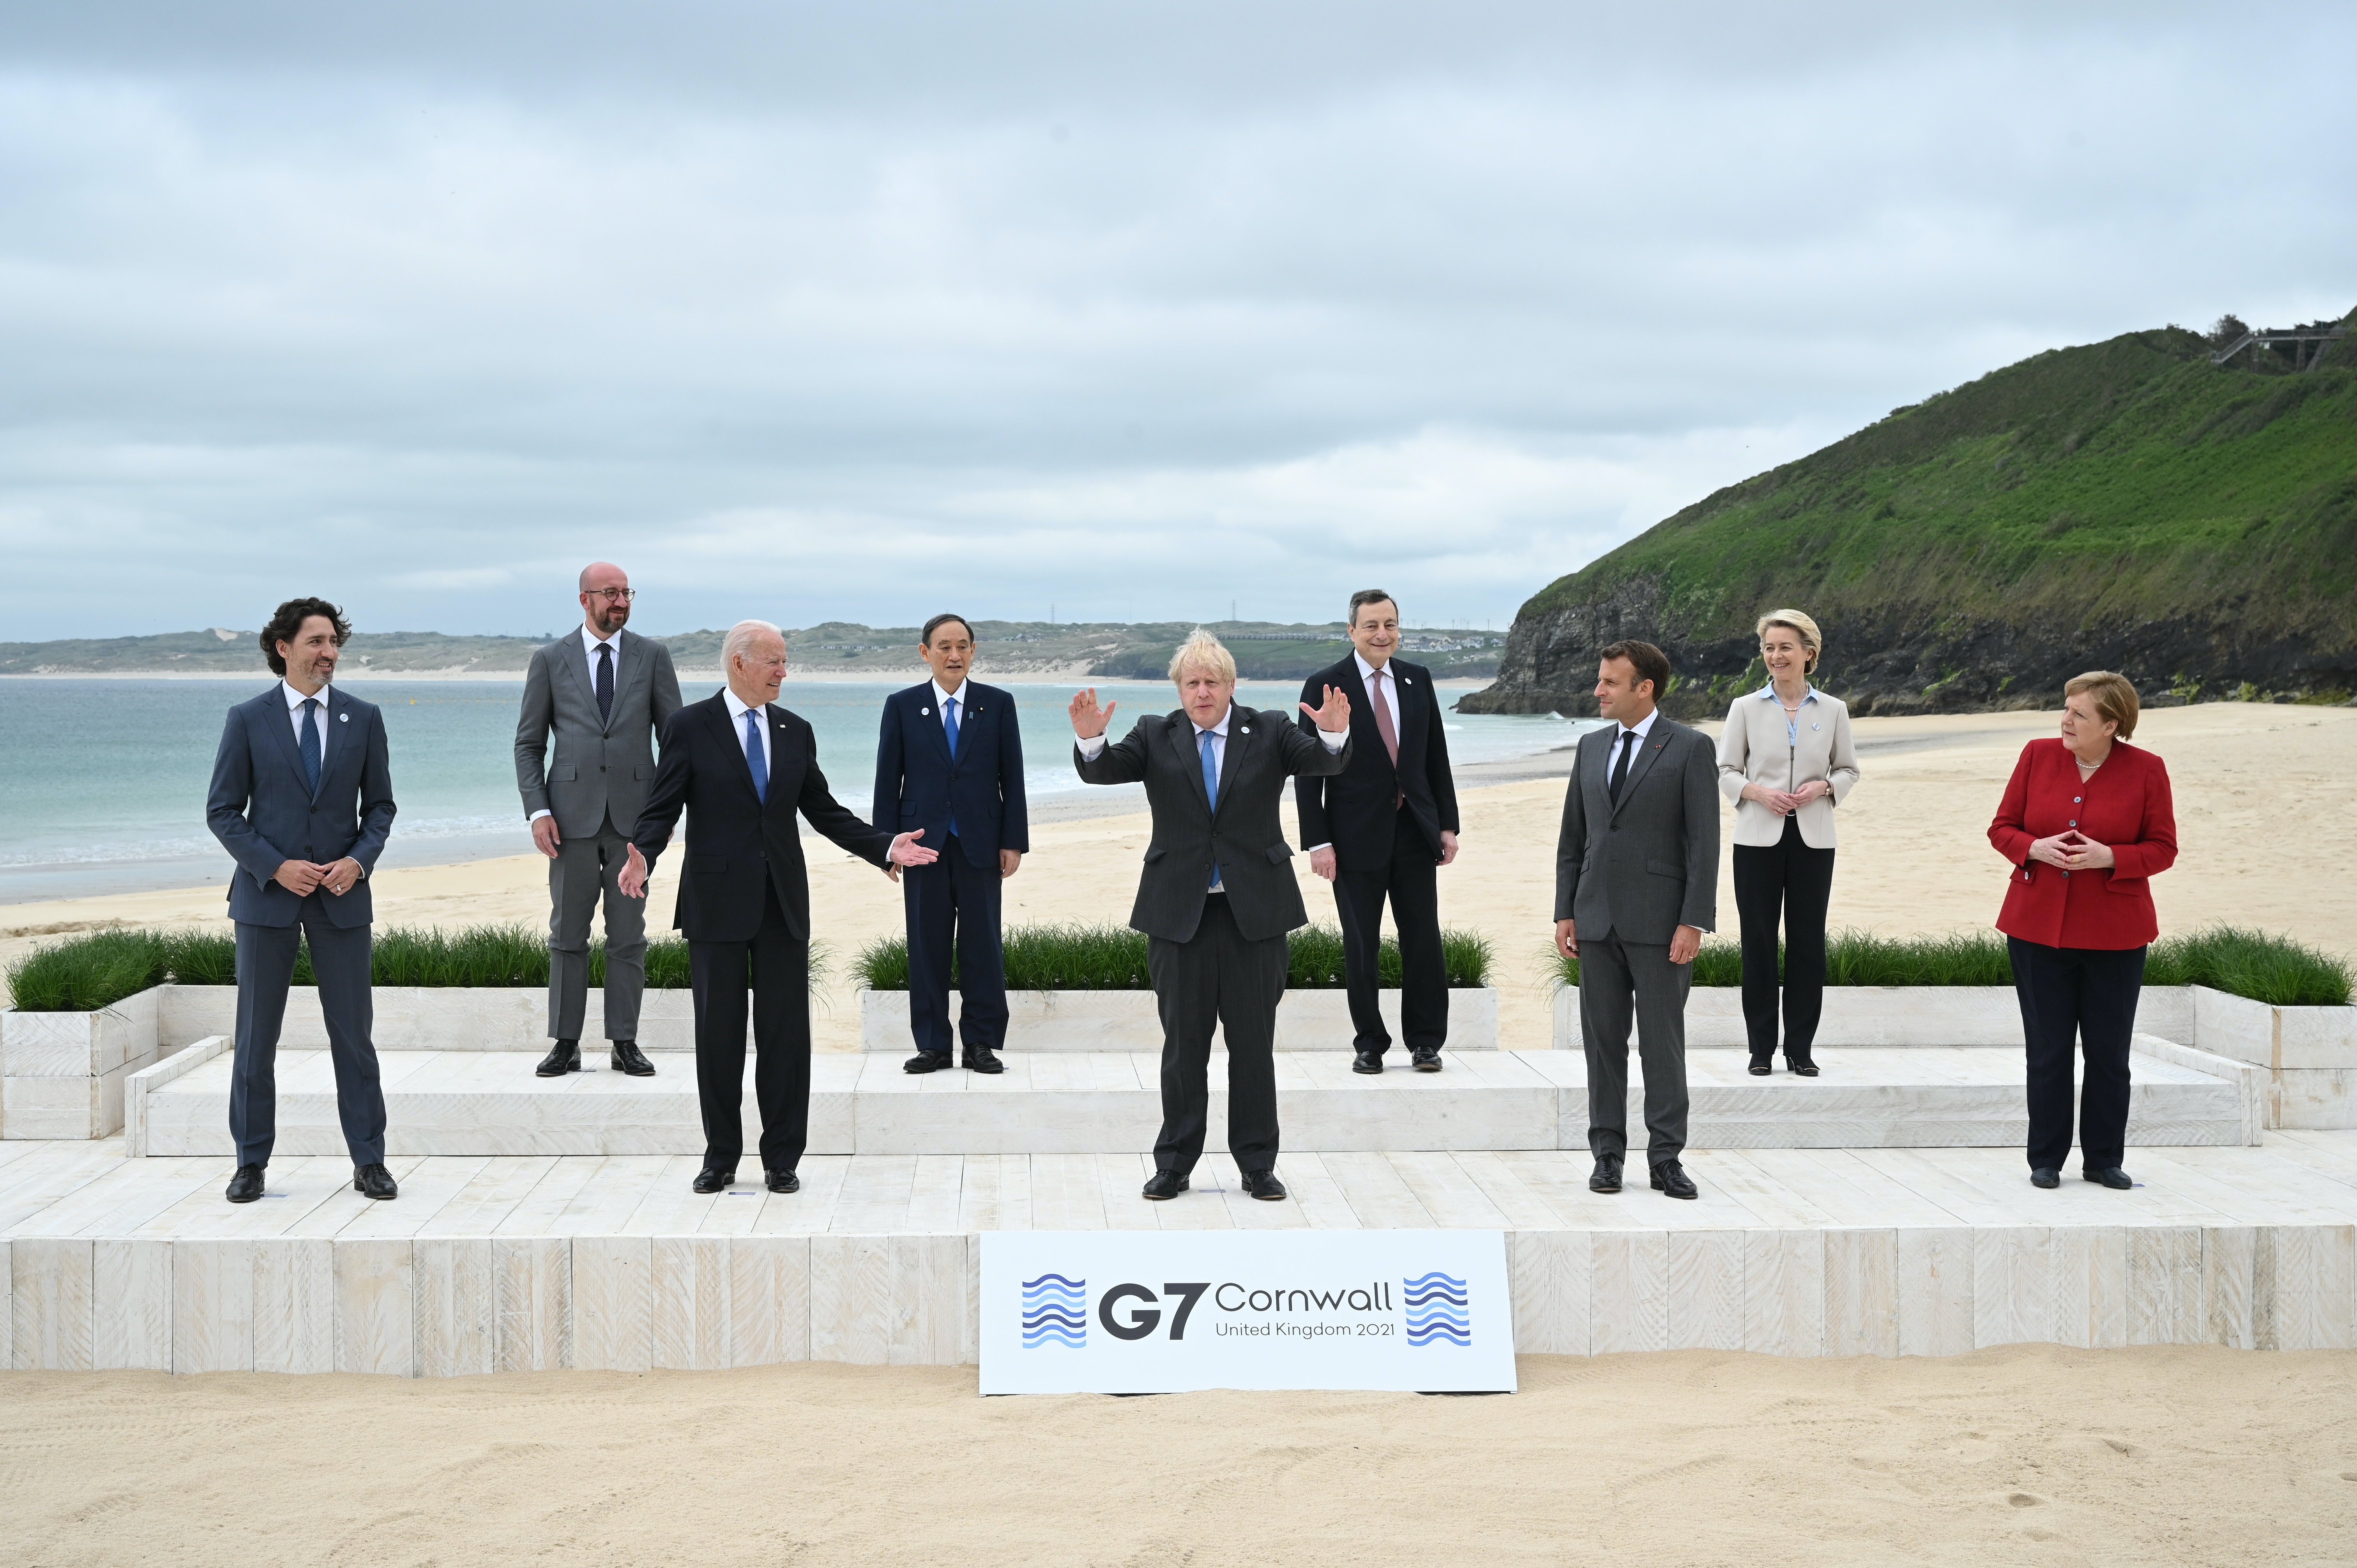 Boris Johnson stands with his arms raised in front of other G7 leaders on a beach.